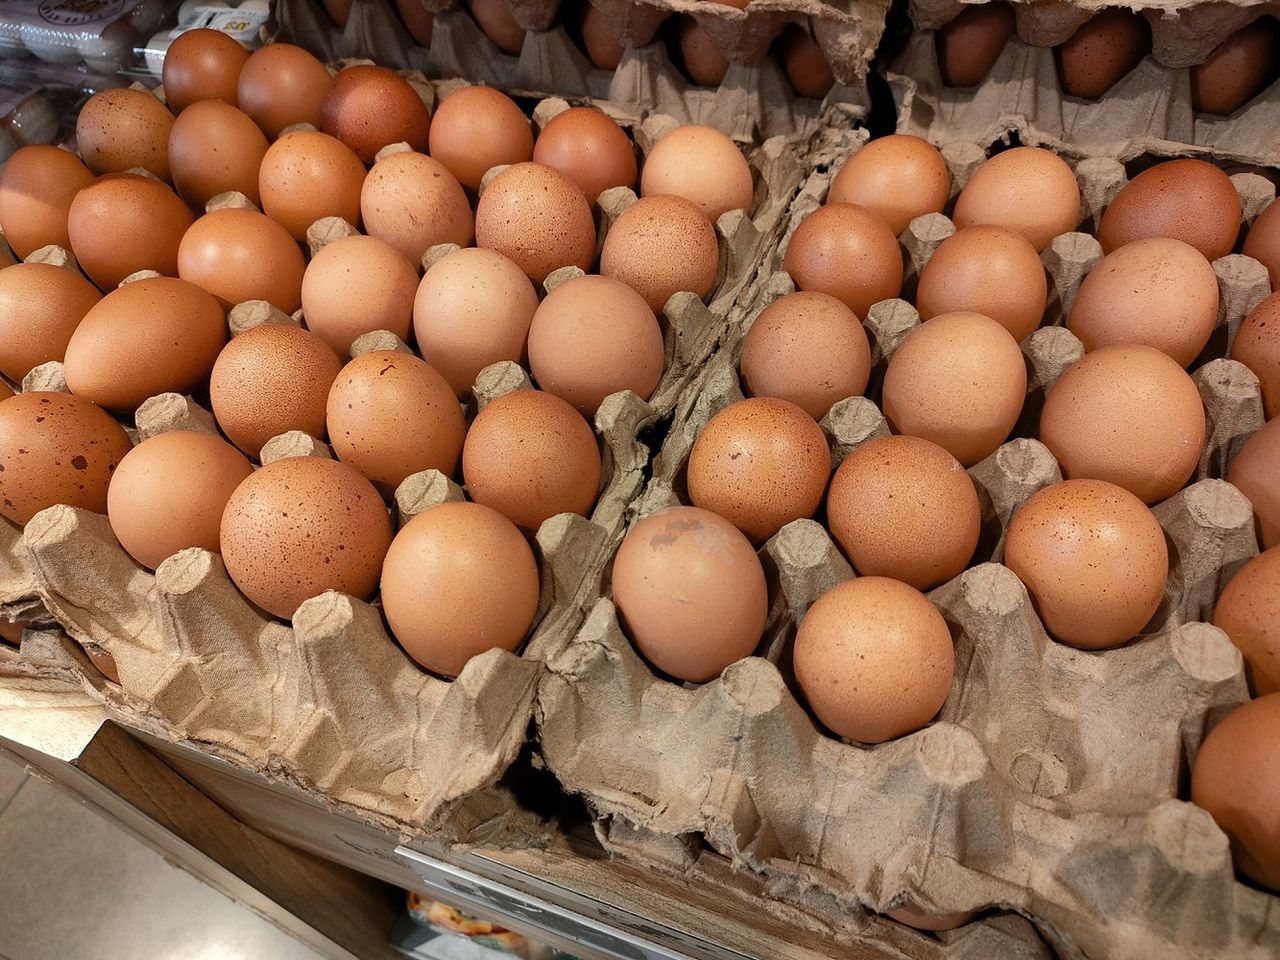 Eggs: from diet enemy to nutritional powerhouse - how many should you eat?